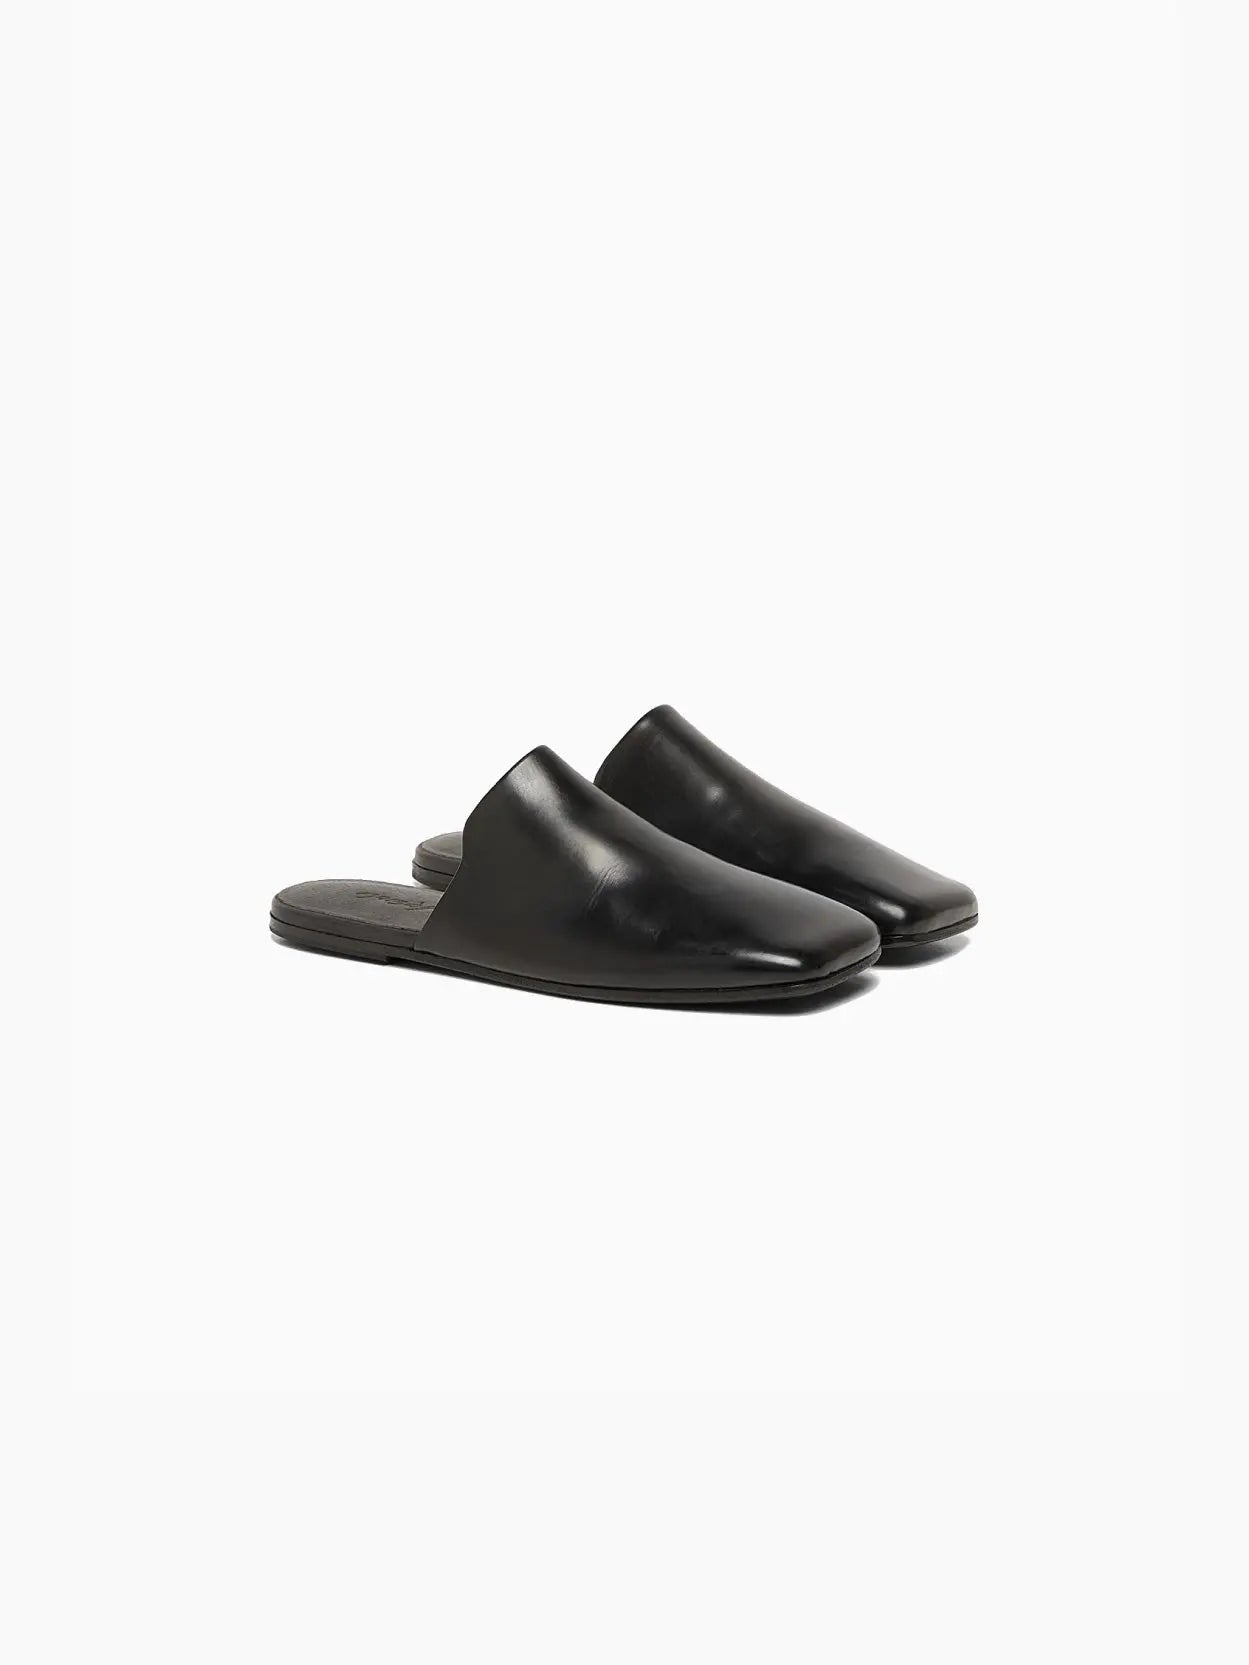 A sleek black leather mule slipper with a flat sole, open back, and round toe design on a white background. Available at Bassalstore in Barcelona, the Spatolona Mule Black by Marsèll features a smooth, polished finish and a low-profile silhouette.